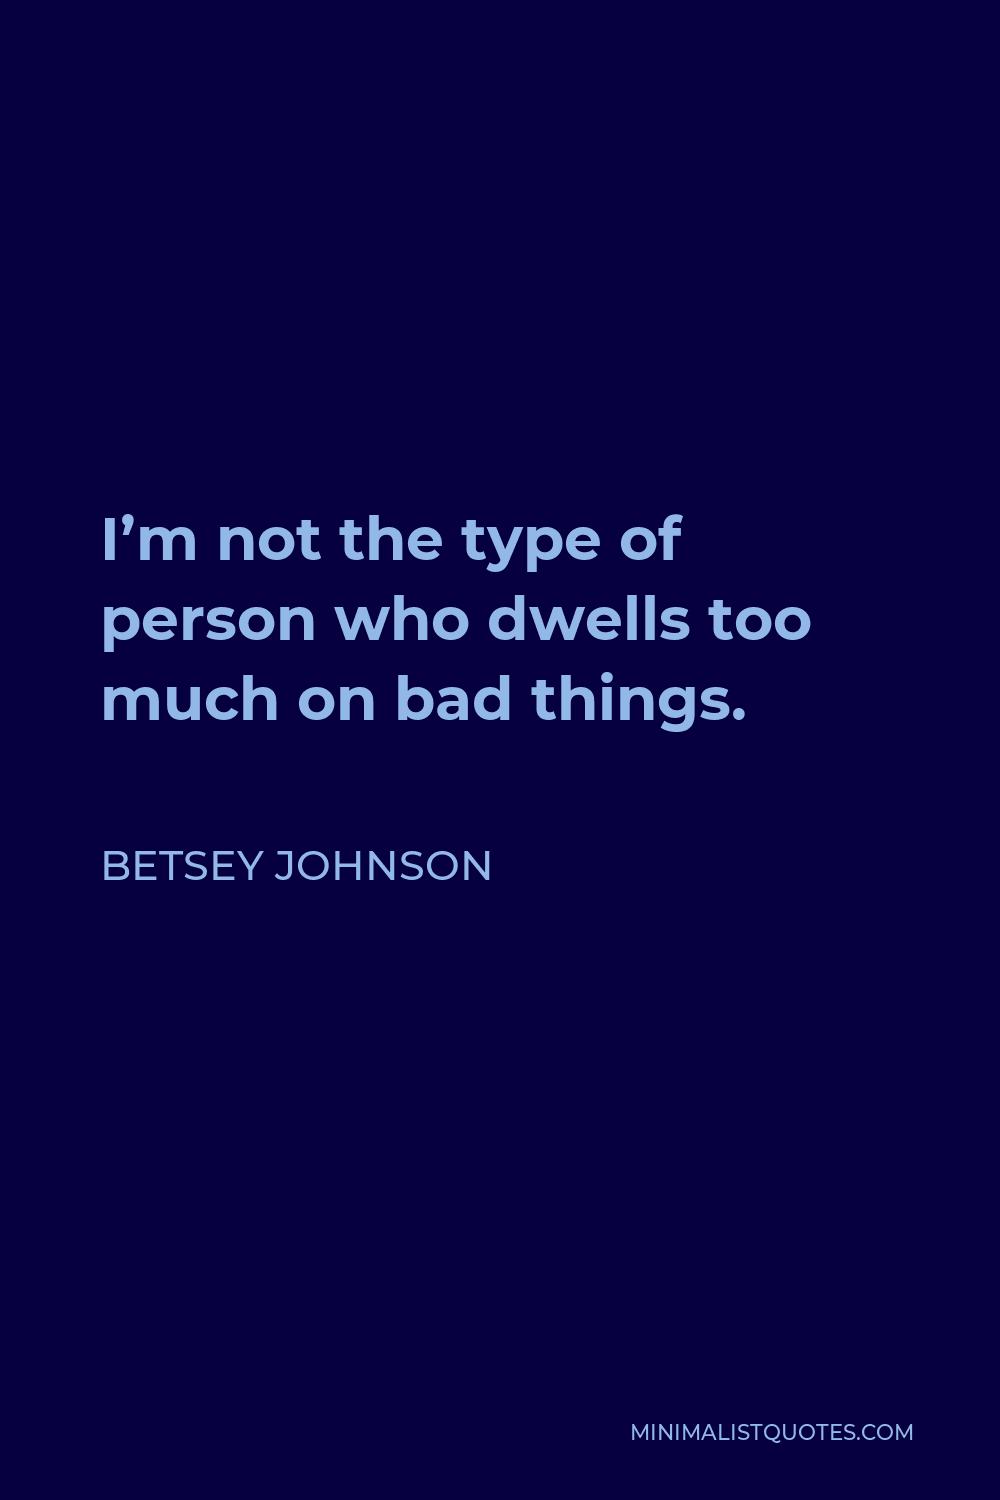 Betsey Johnson Quote - I’m not the type of person who dwells too much on bad things.